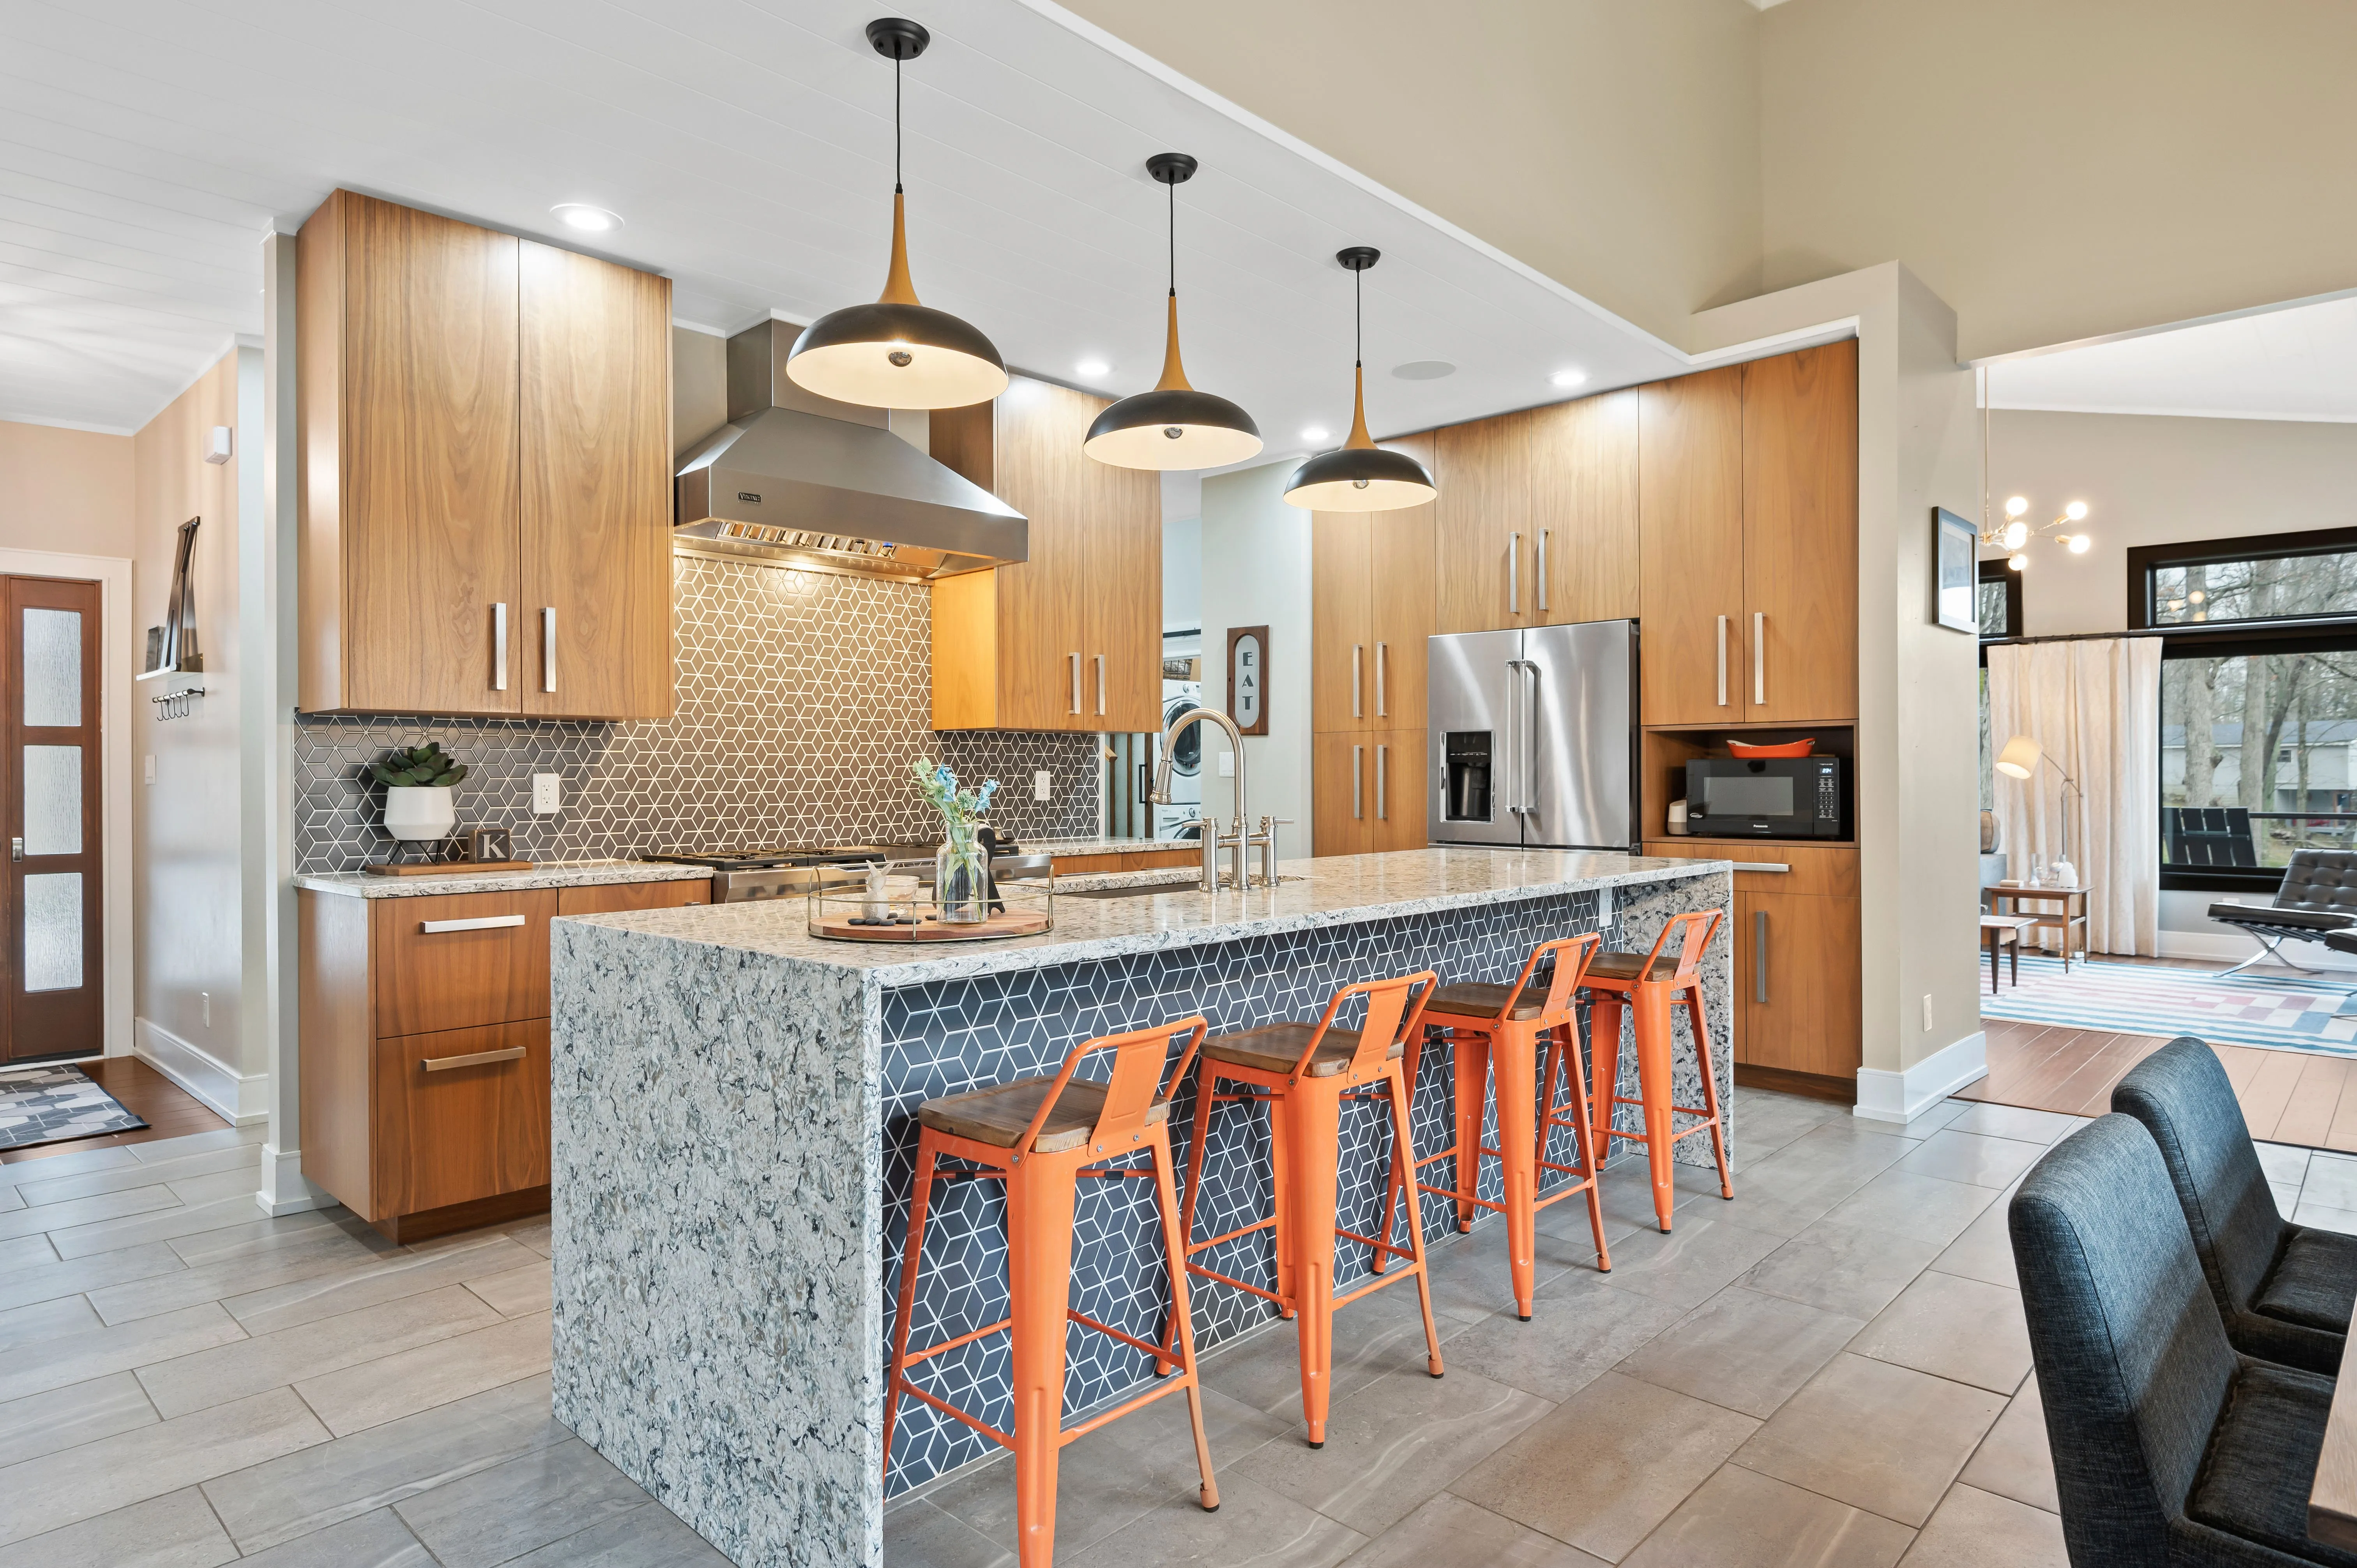 Modern kitchen interior with island and bar stools, wooden cabinetry, and stainless steel appliances.